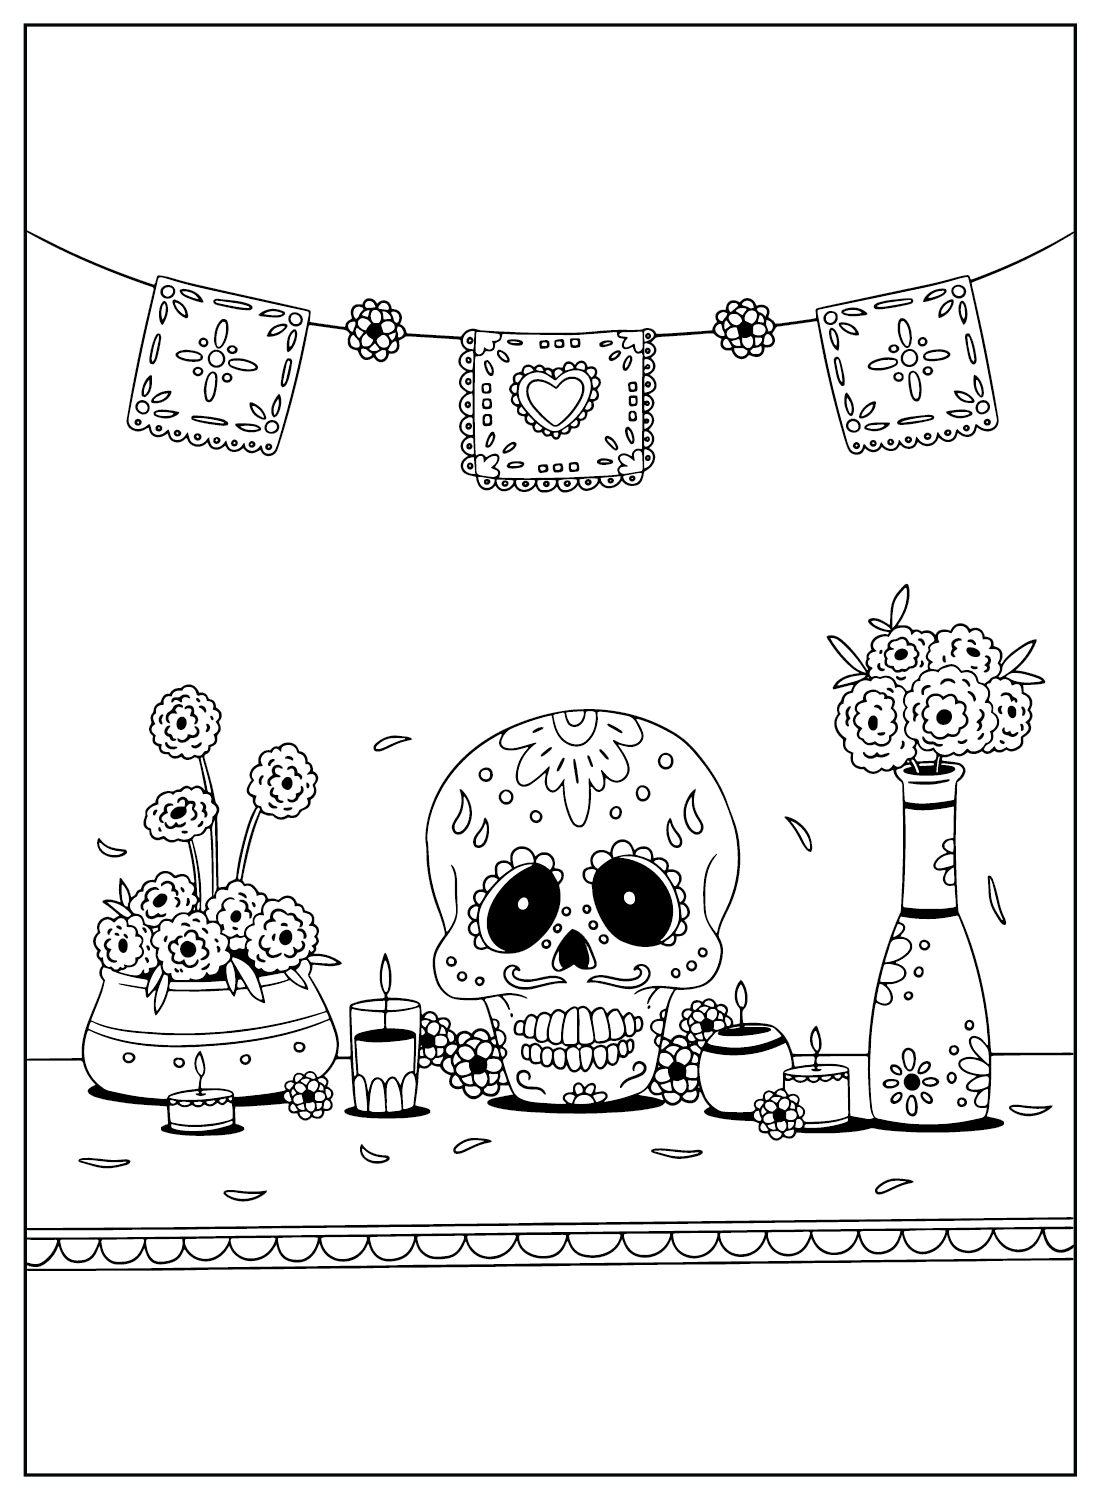 Day of The Dead Coloring Page Printable Free from Day Of The Dead